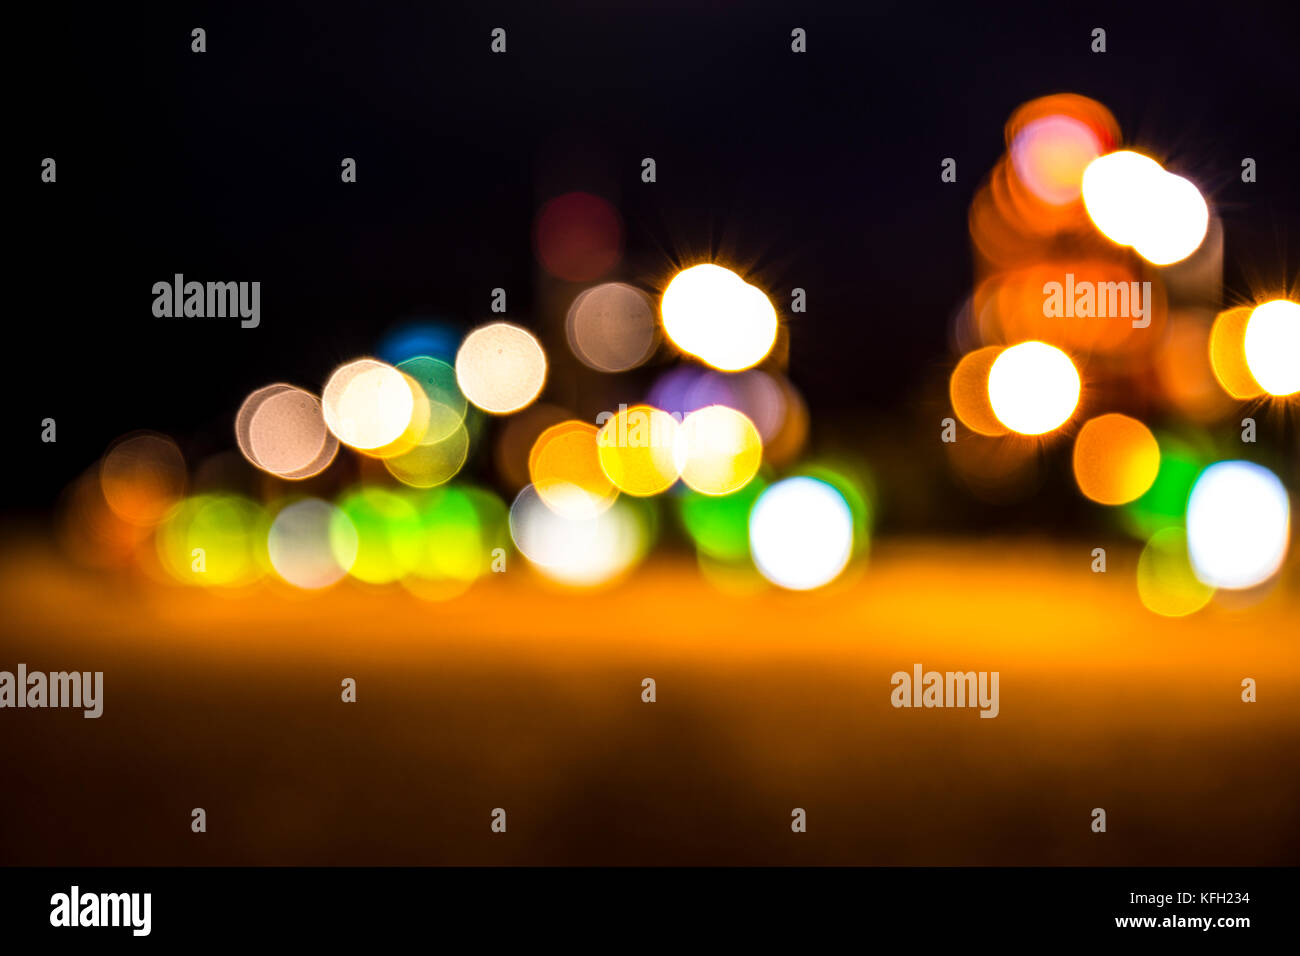 Abstract Fancy Light Background. Stock Photo